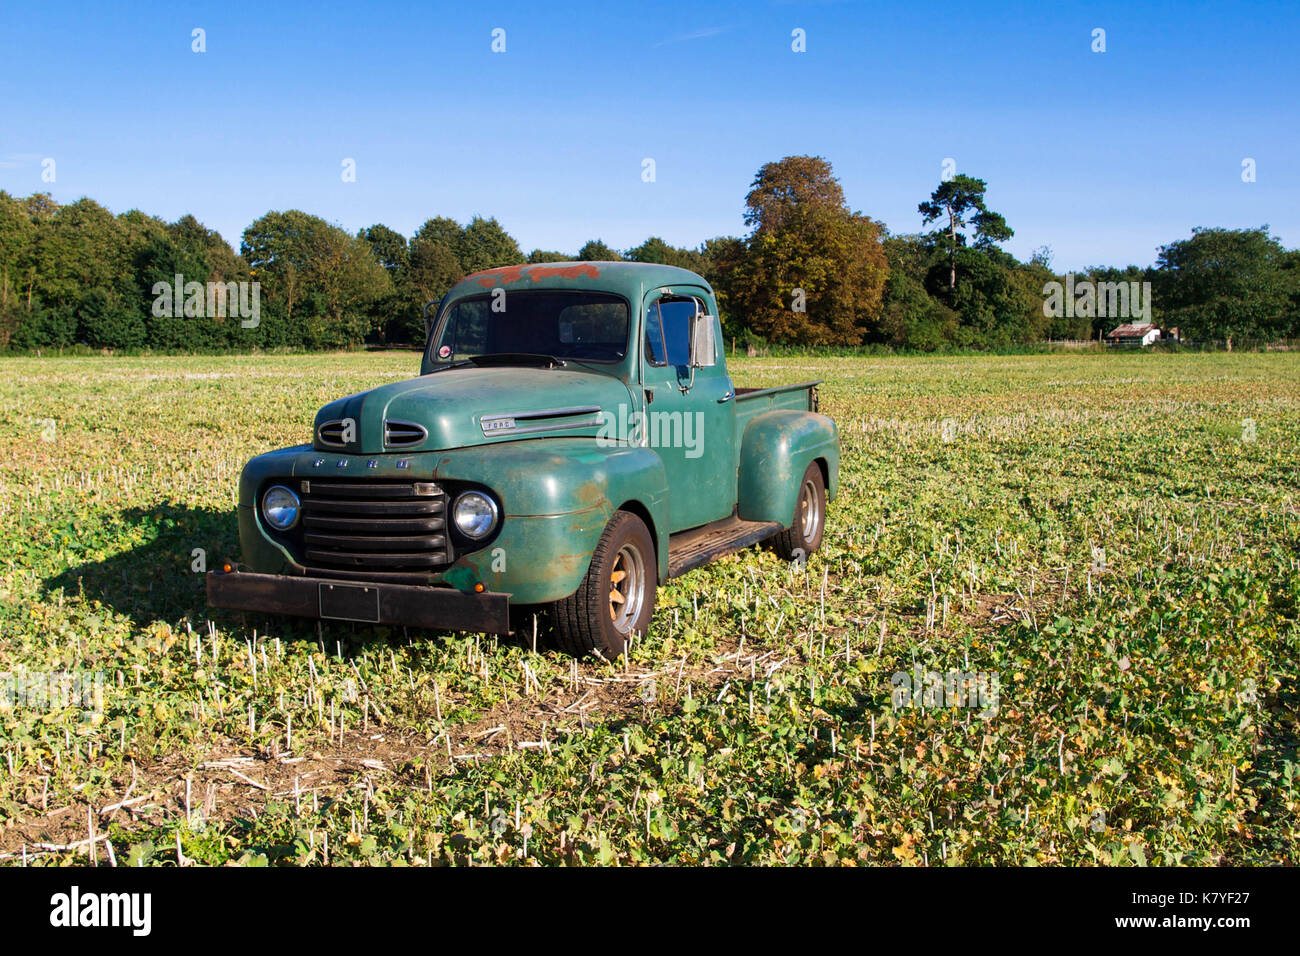 Antique Ford F-1 Truck with Wooden Spoke Wheels Sitting Out in a Field Stock Photo